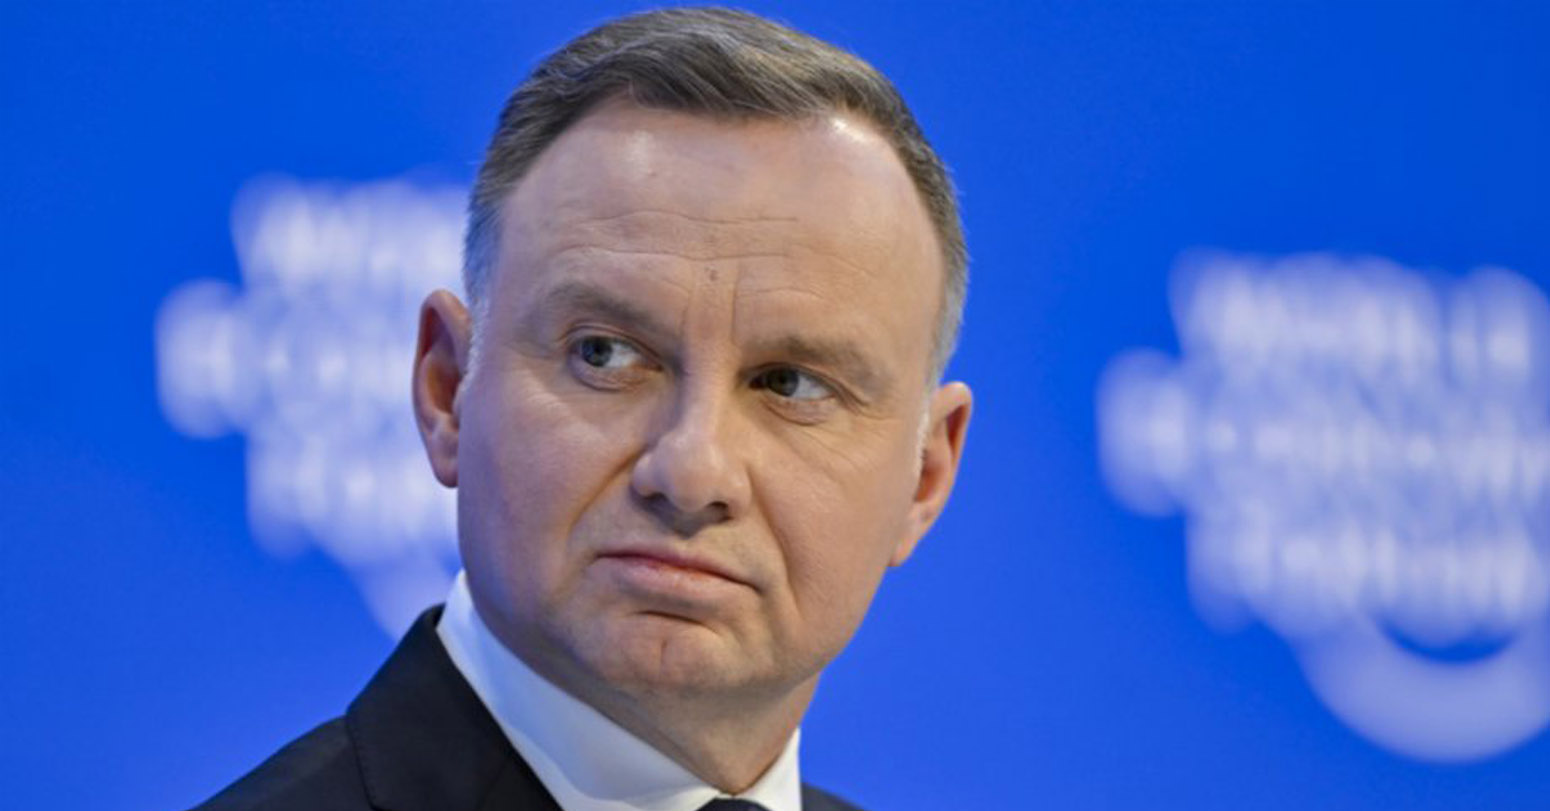 Poland Ready To Host NATO Members’ Nuclear Weapons To Counter Russia, Says President